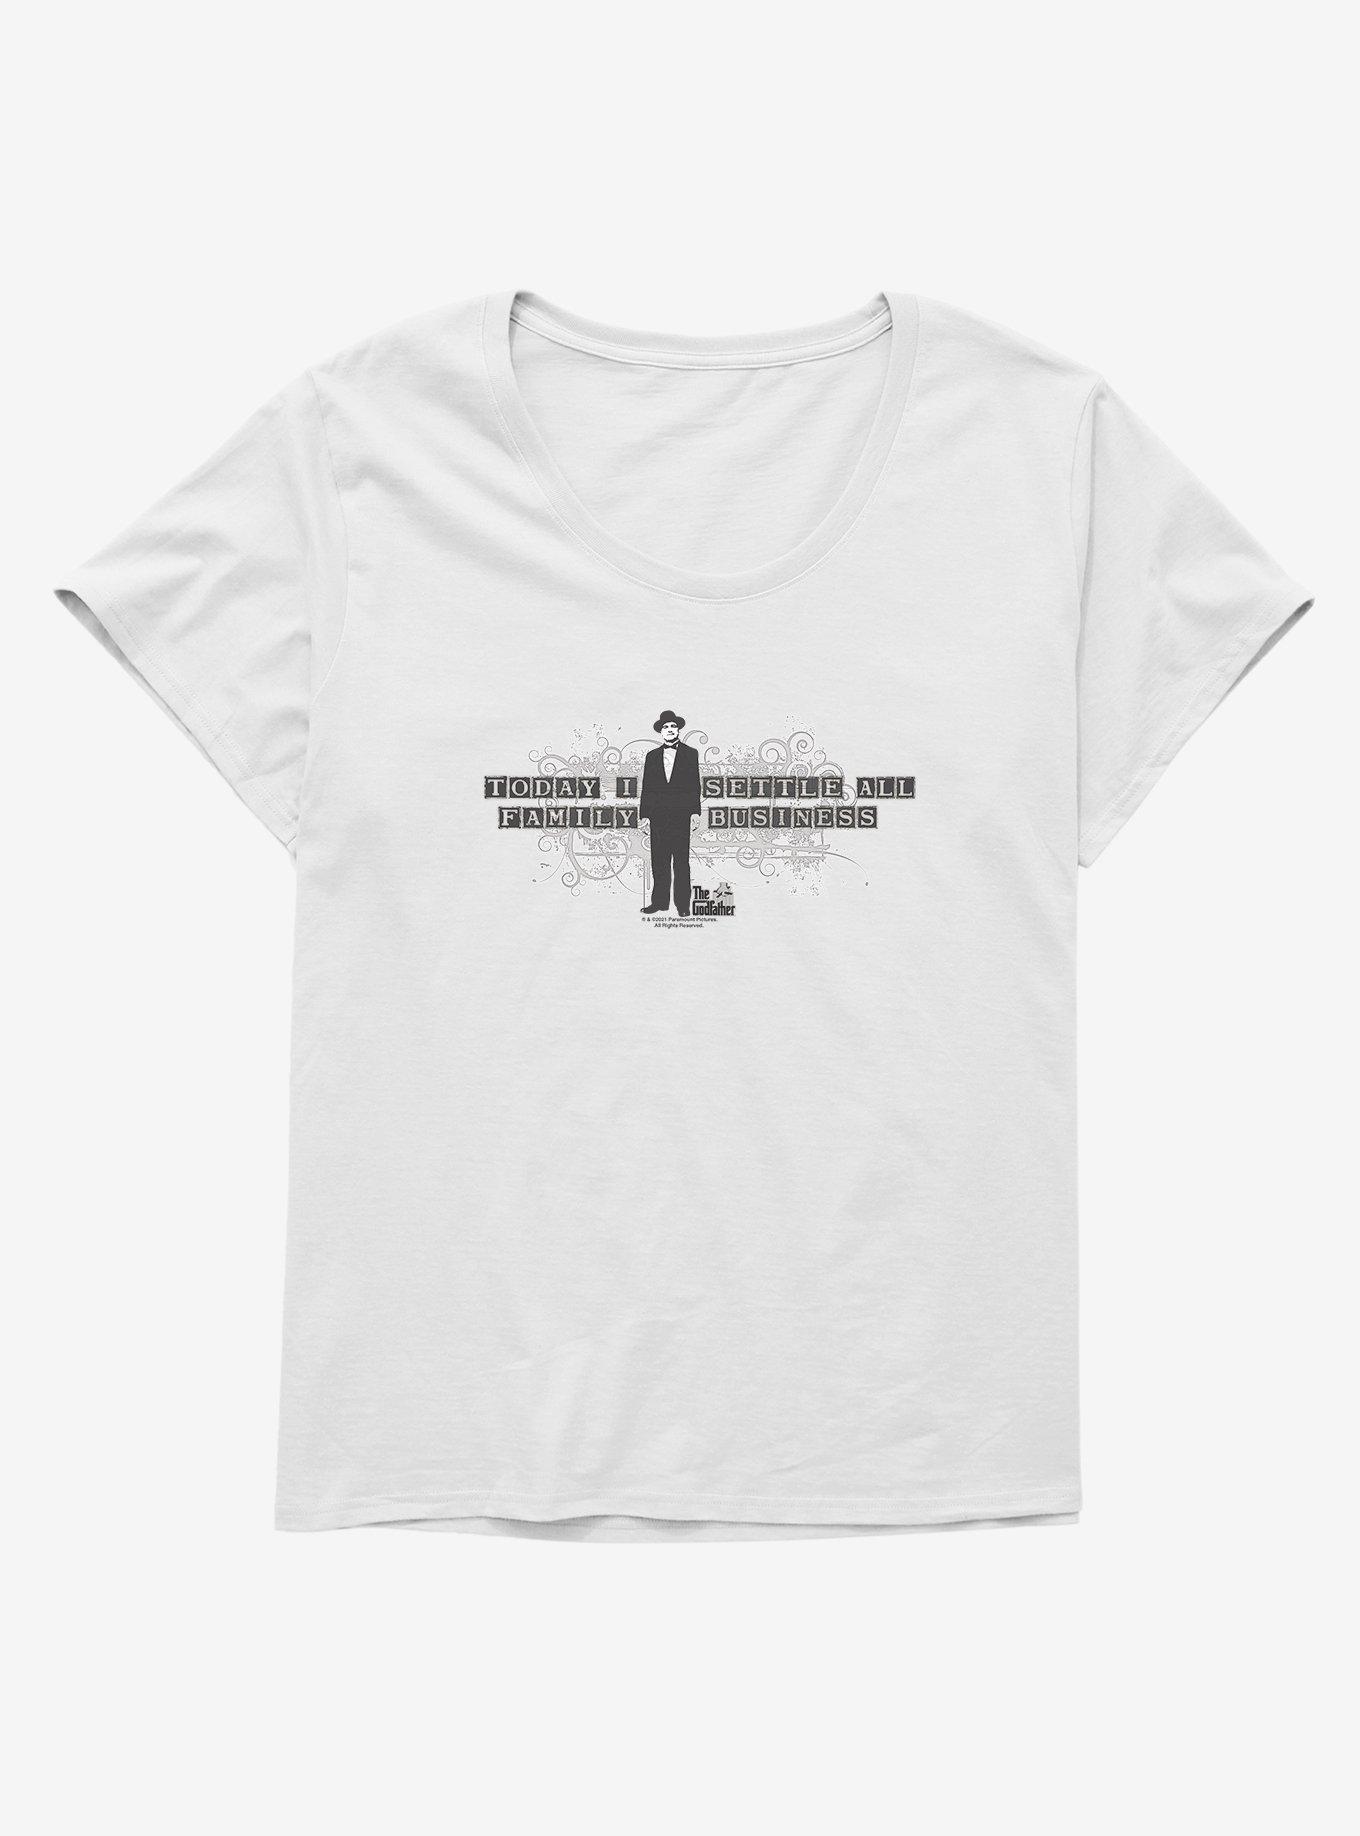 The Godfather Family Business Girls T-Shirt Plus Size, , hi-res